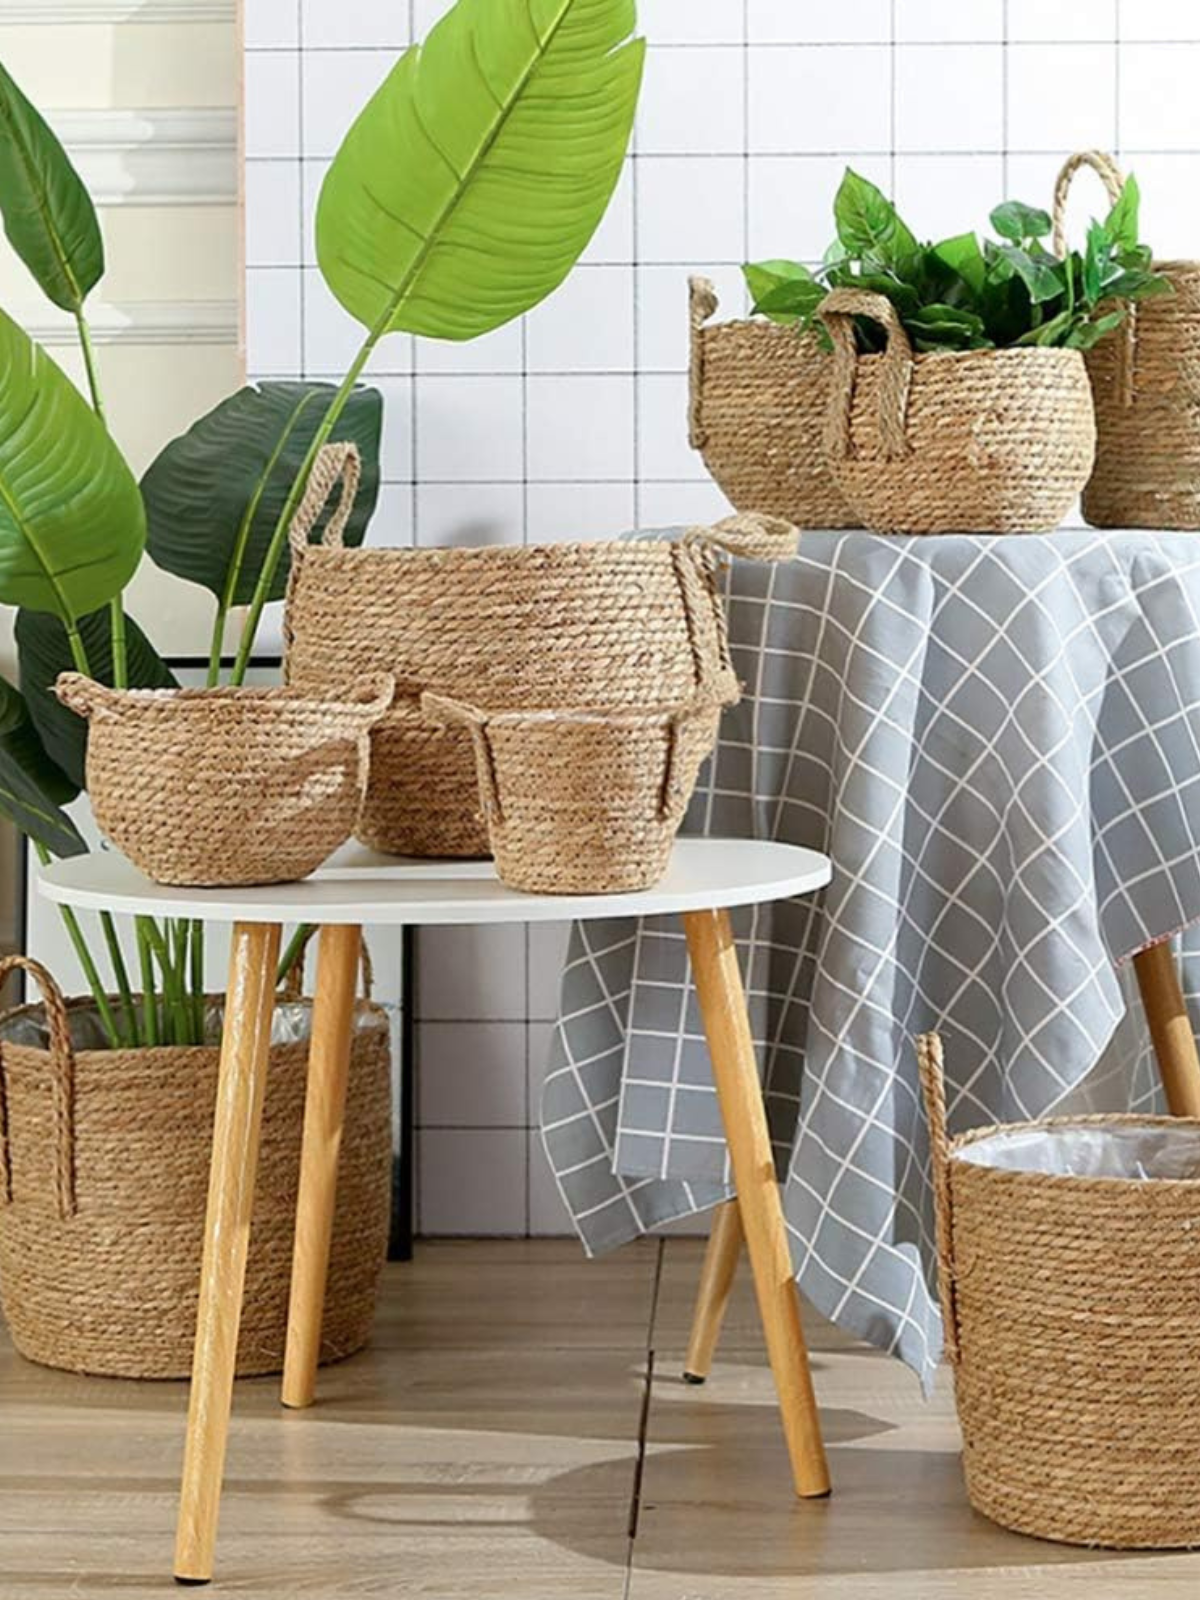 Seagrass Basket Planters Flower Pots with Plastic Liner, Plant Containers Storage Holder Wicker Rattan Vase with Handle